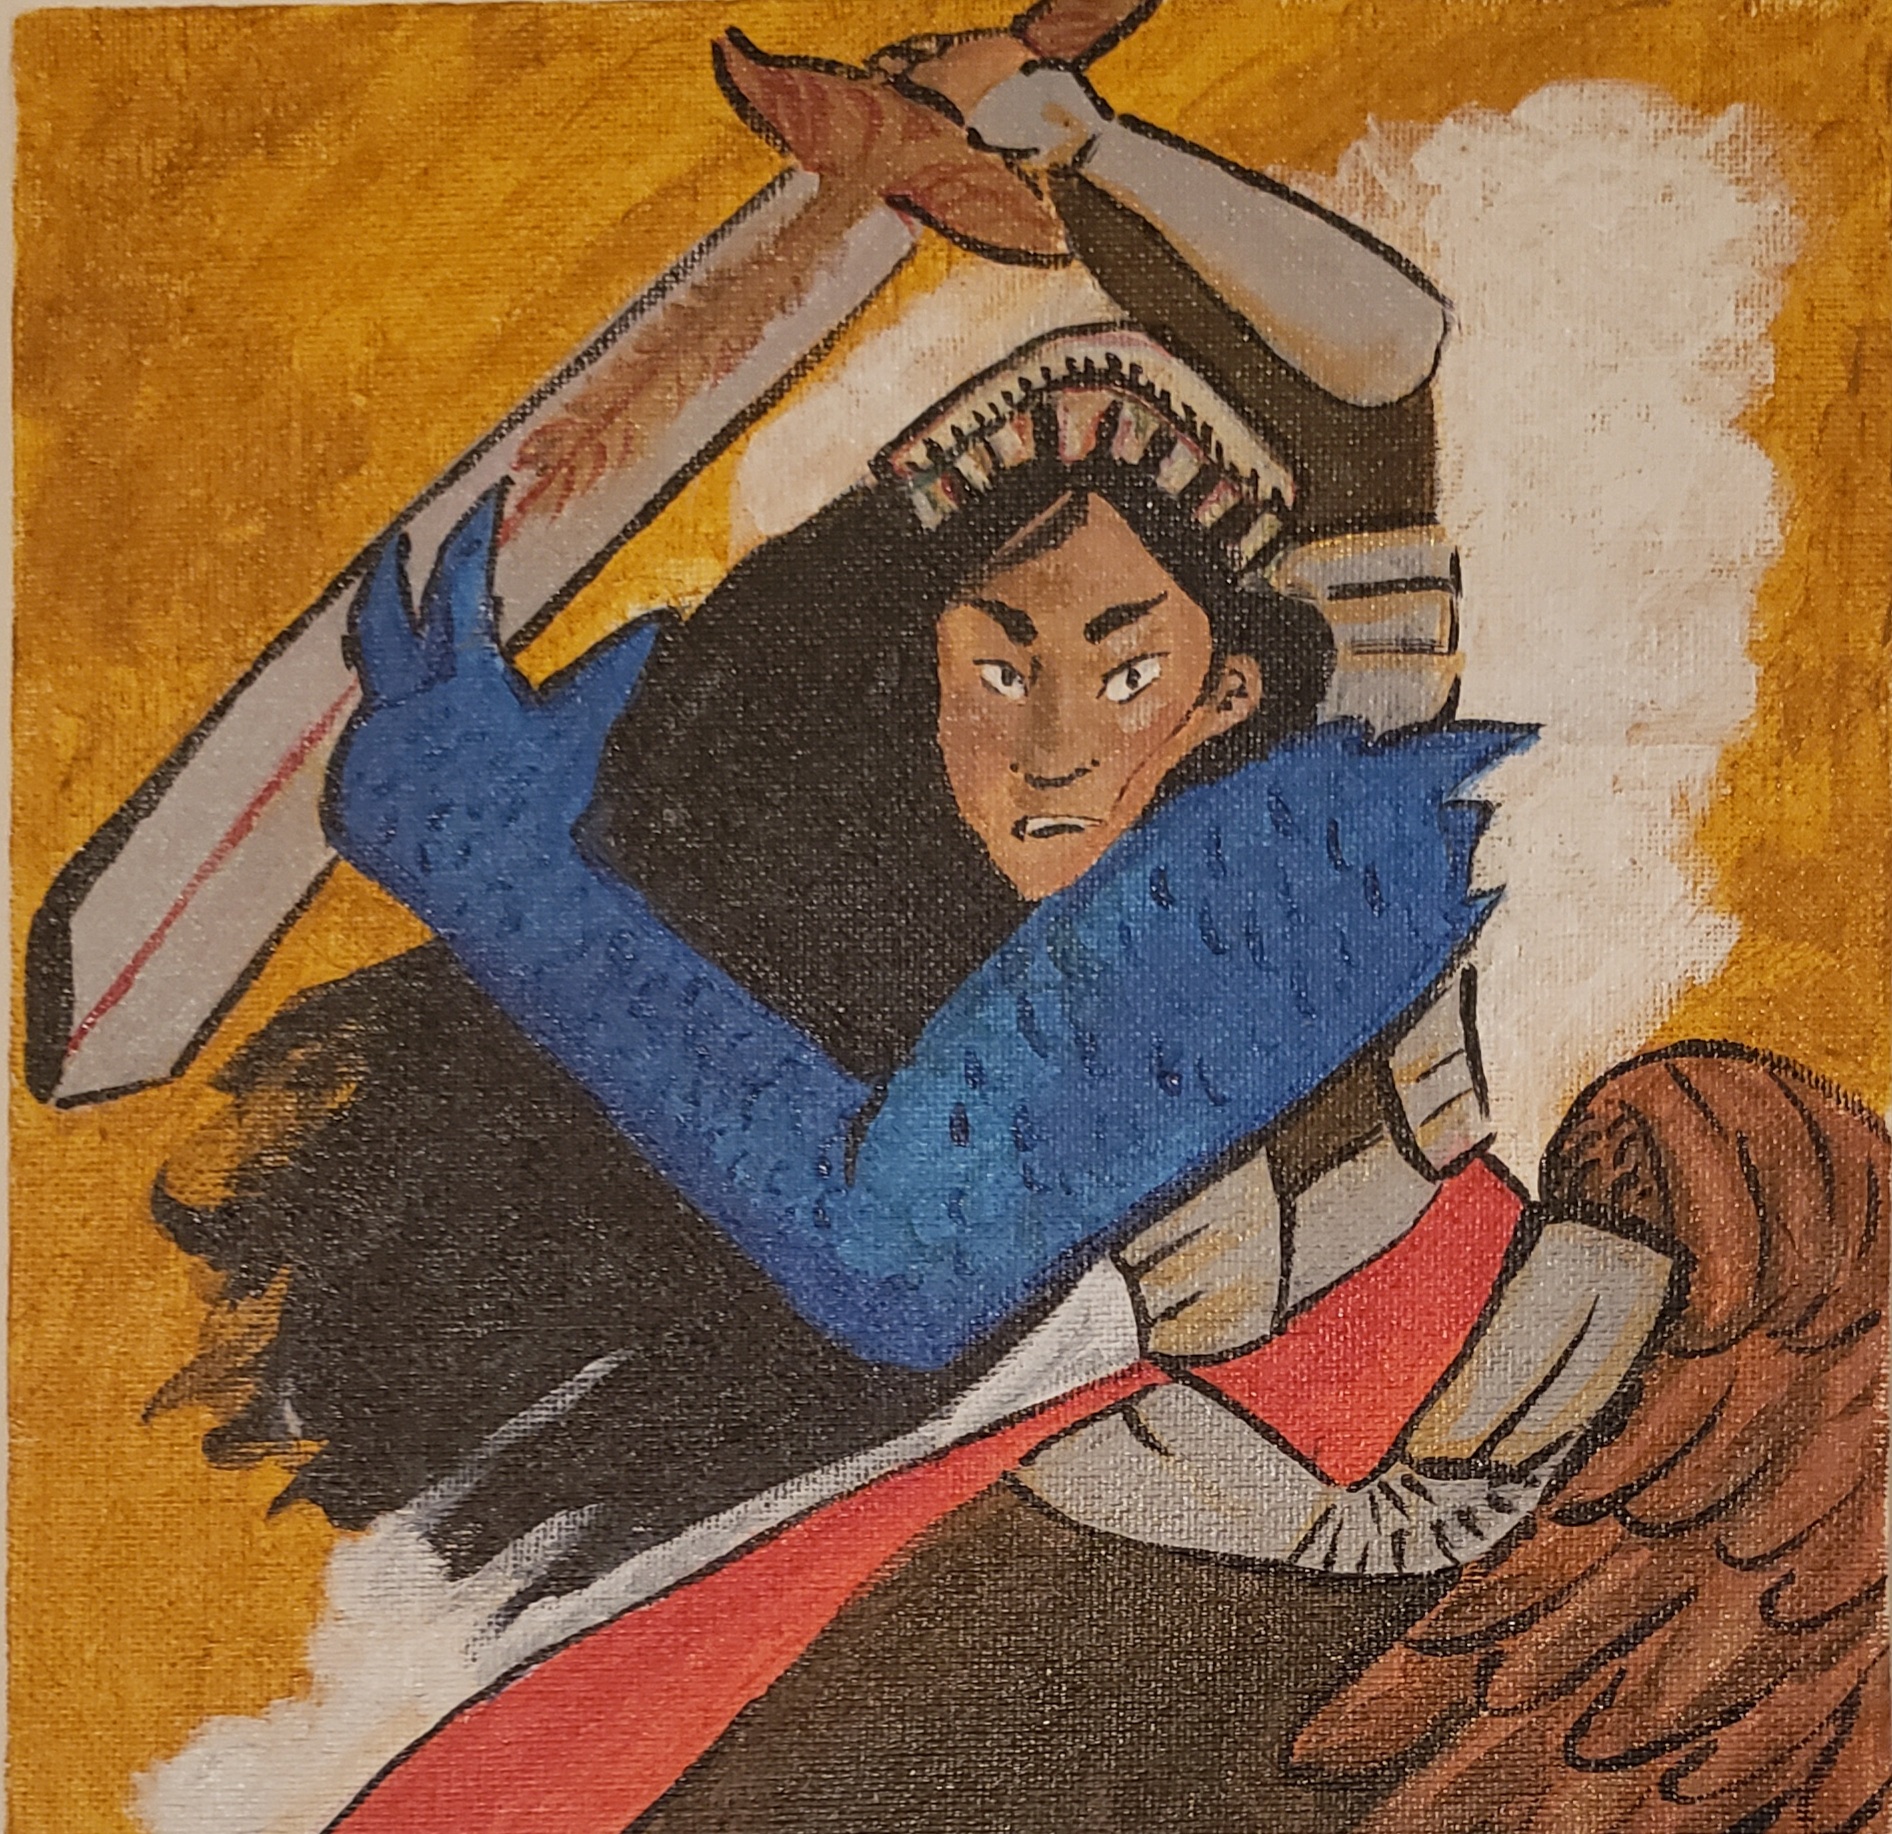 image of a fierce East Asian woman wielding a sword on one hand with a guantlet in the other